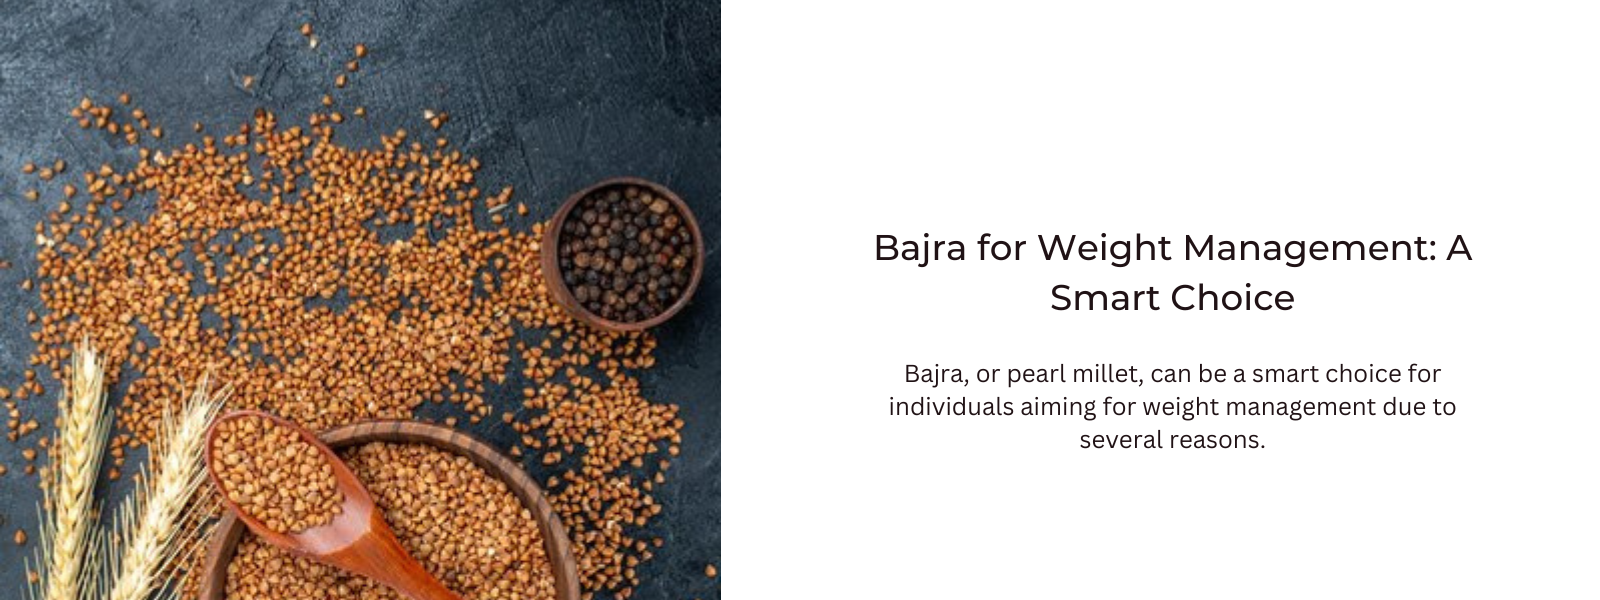 Bajra for Weight Management: A Smart Choice